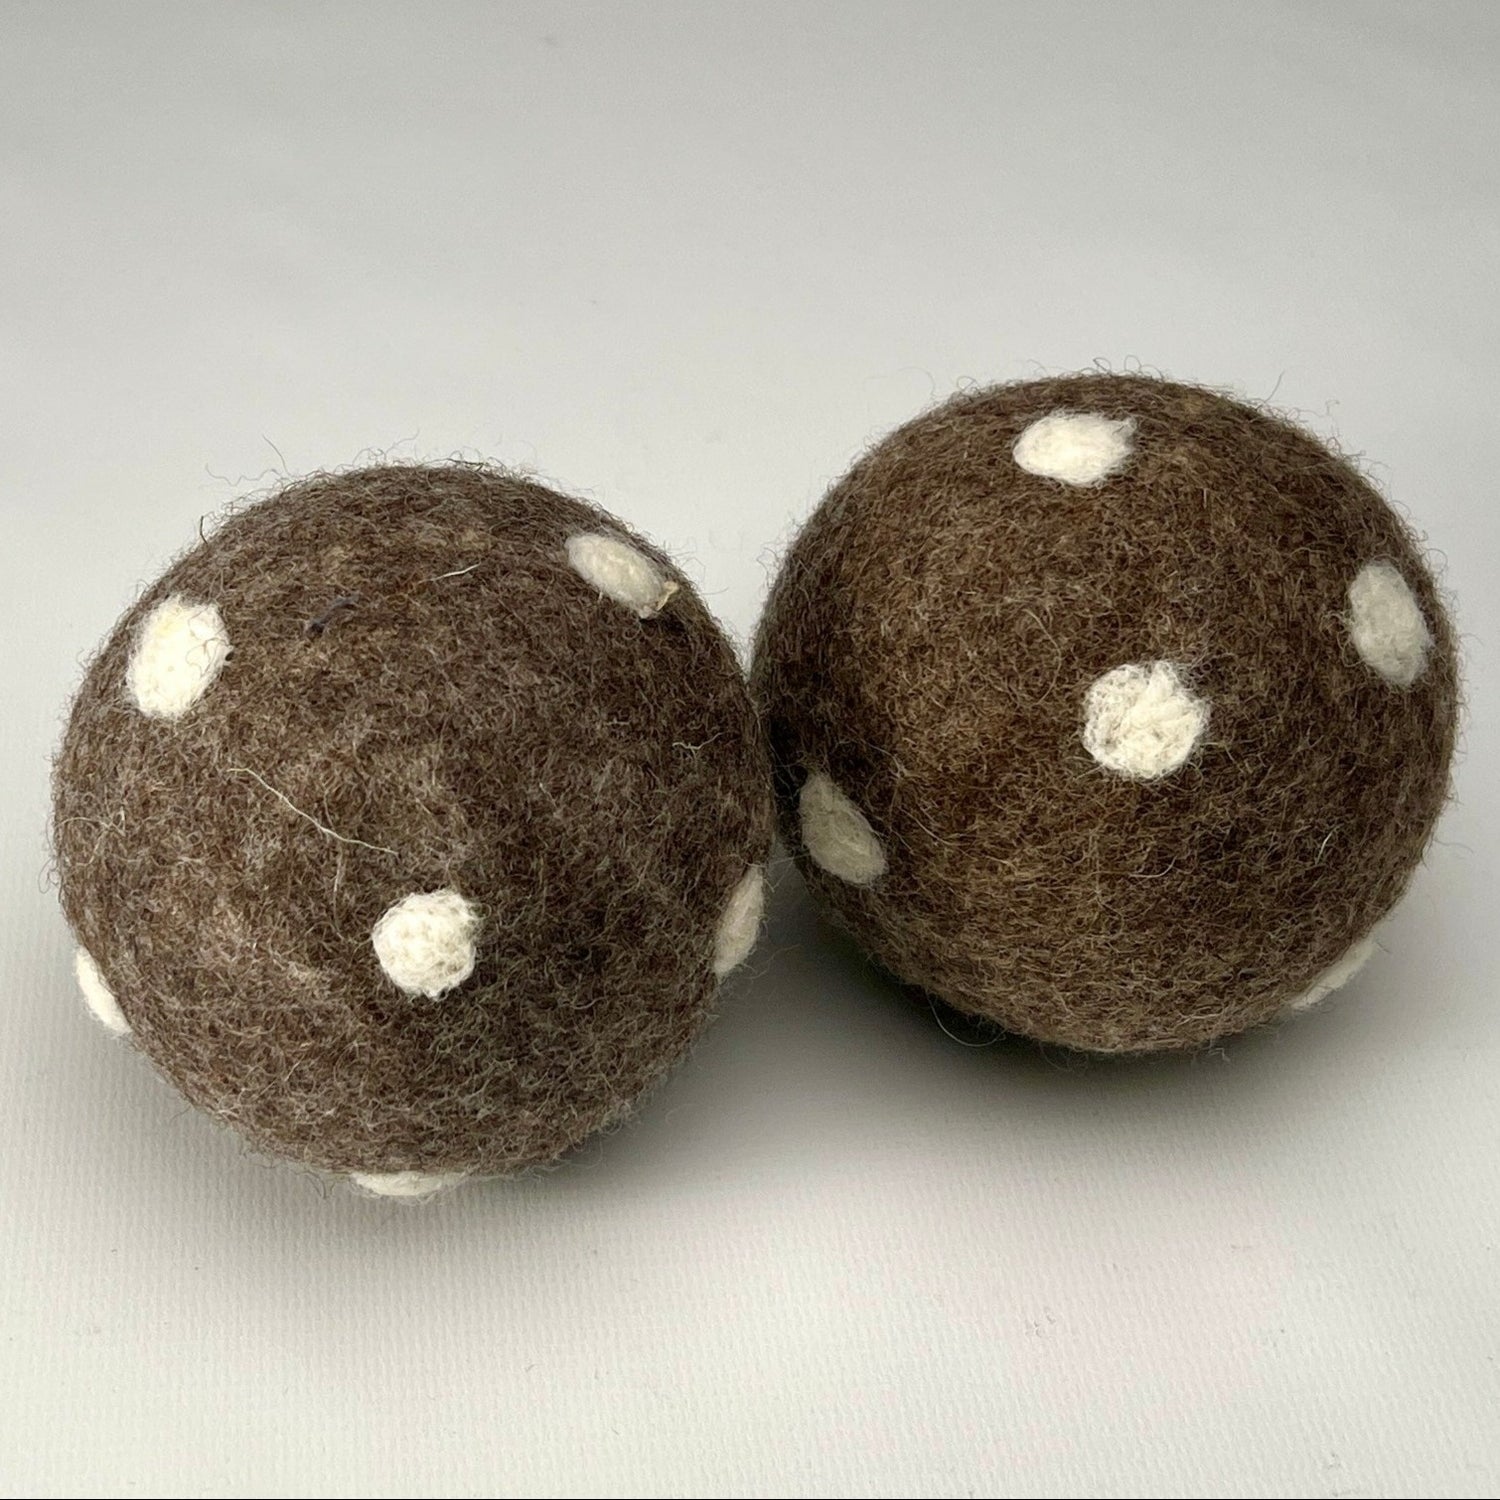 Dog Toys - two large soft, felt dog balls - brown / neutral colour with white polka dots